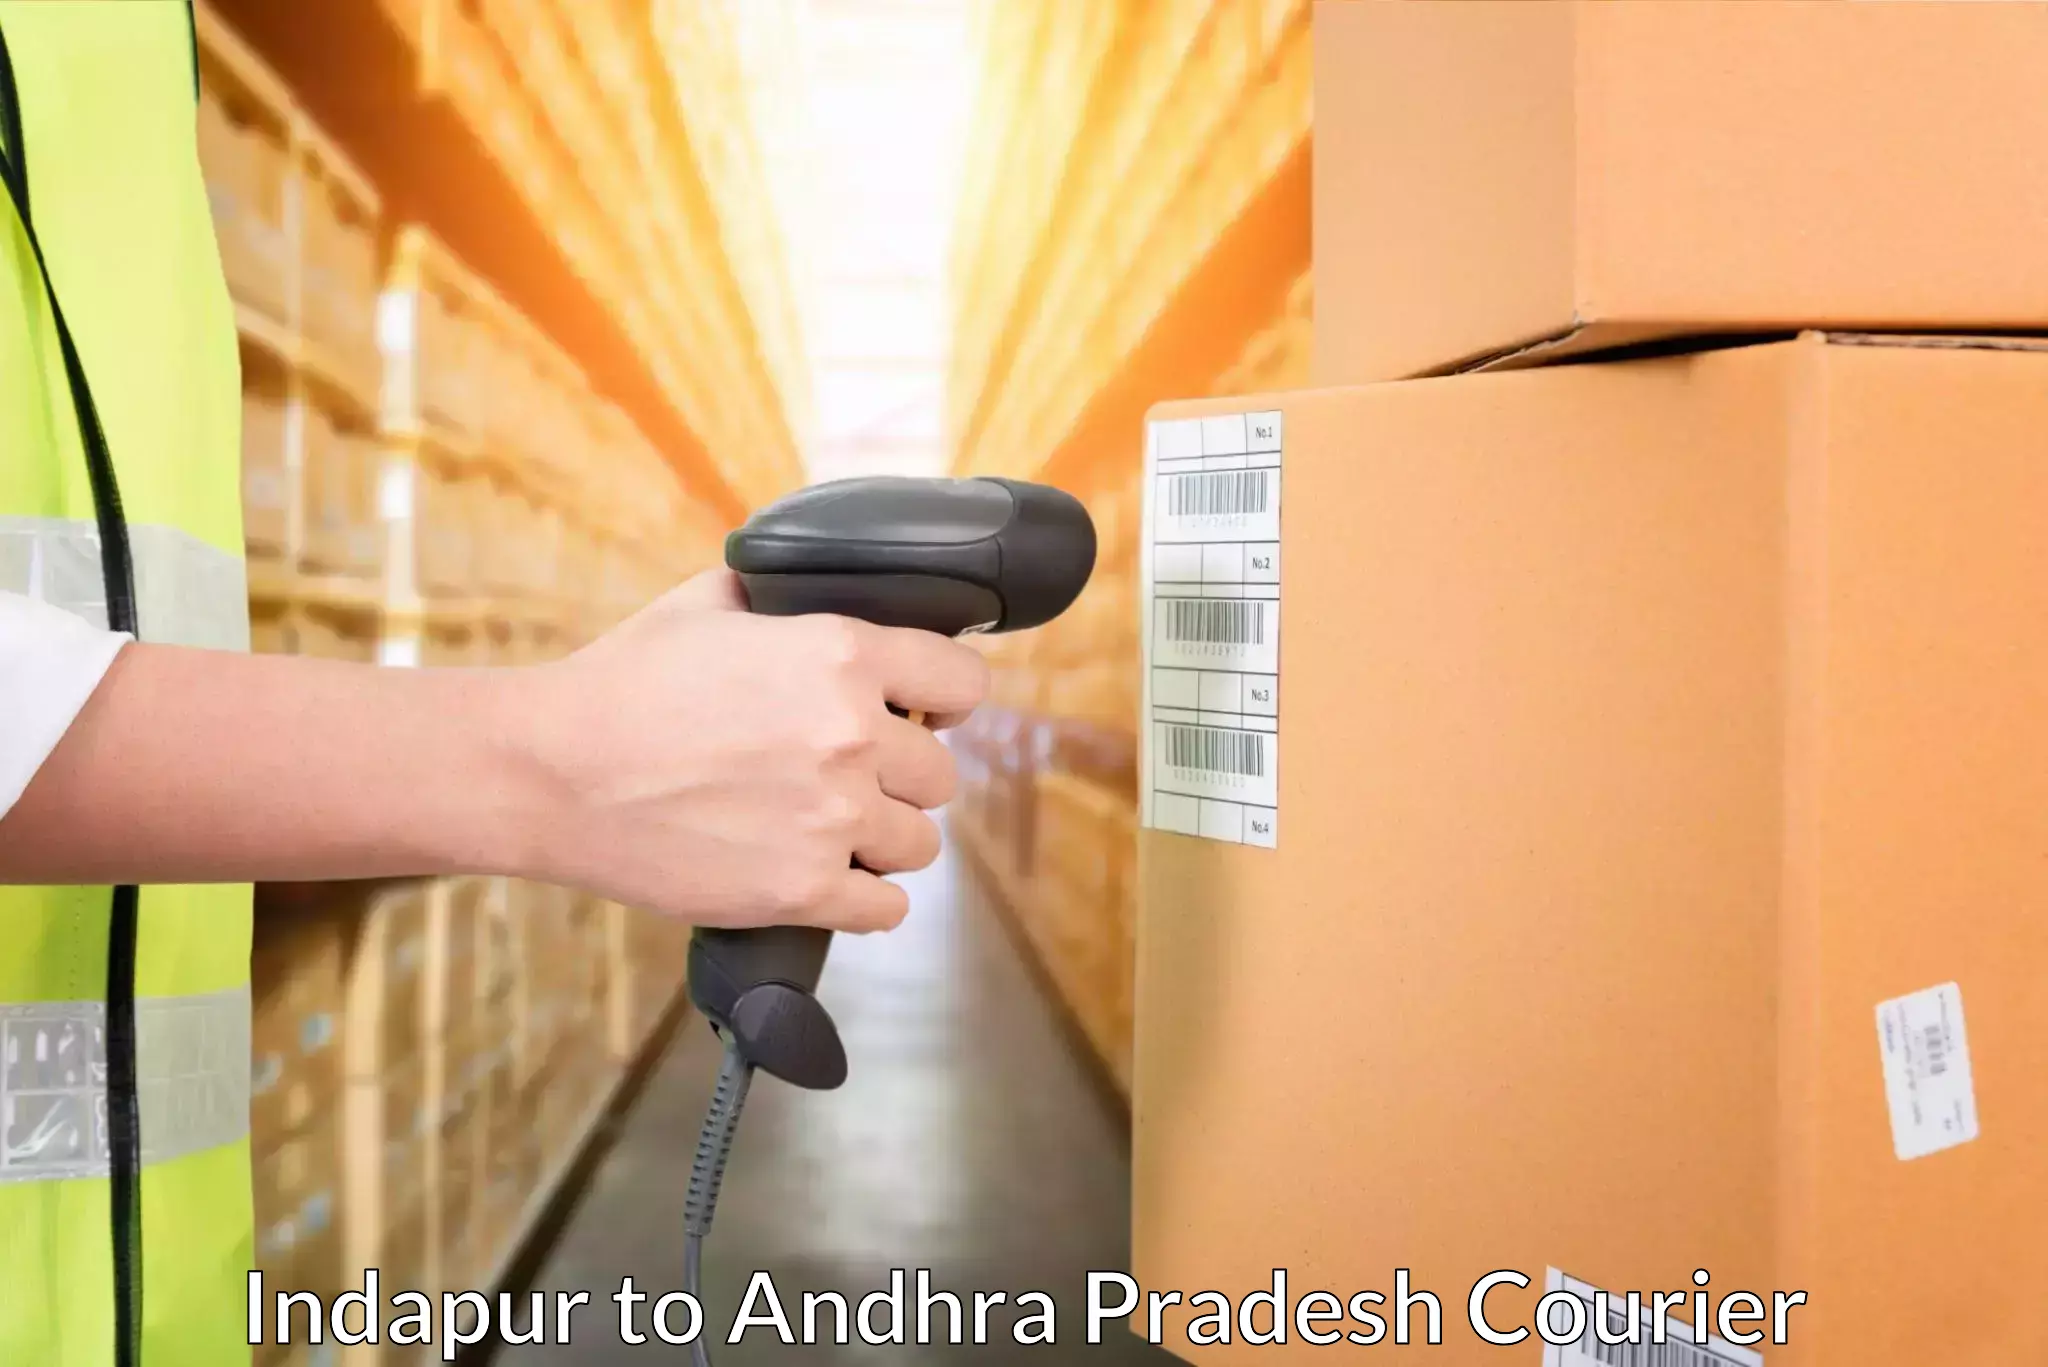 Efficient courier operations Indapur to Visakhapatnam Port